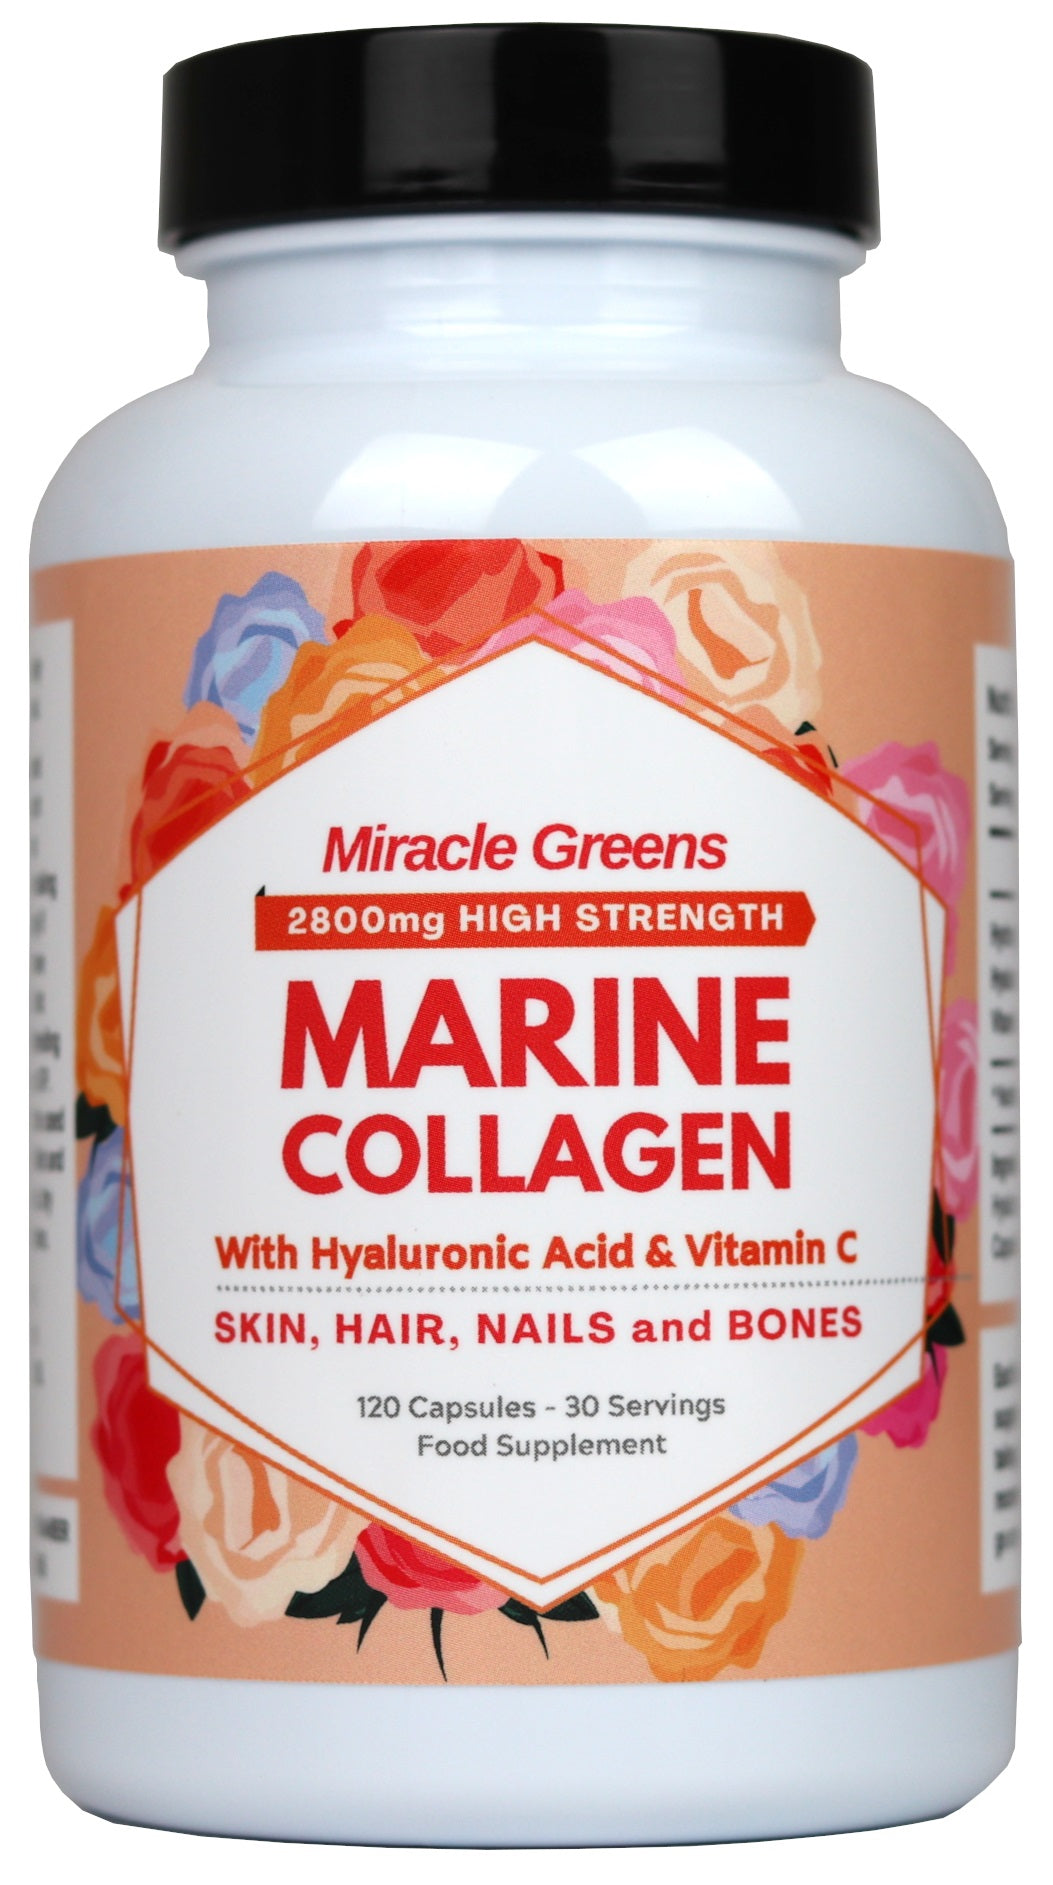 2800mg Marine Collagen Capsules – Highest Strength Type 1 Hydrolysed Collagen with Hyaluronic Acid and Vitamin C - Sourced from Wild Caught Fish - Made in the UK – 120 Capsules for Both Women and Men